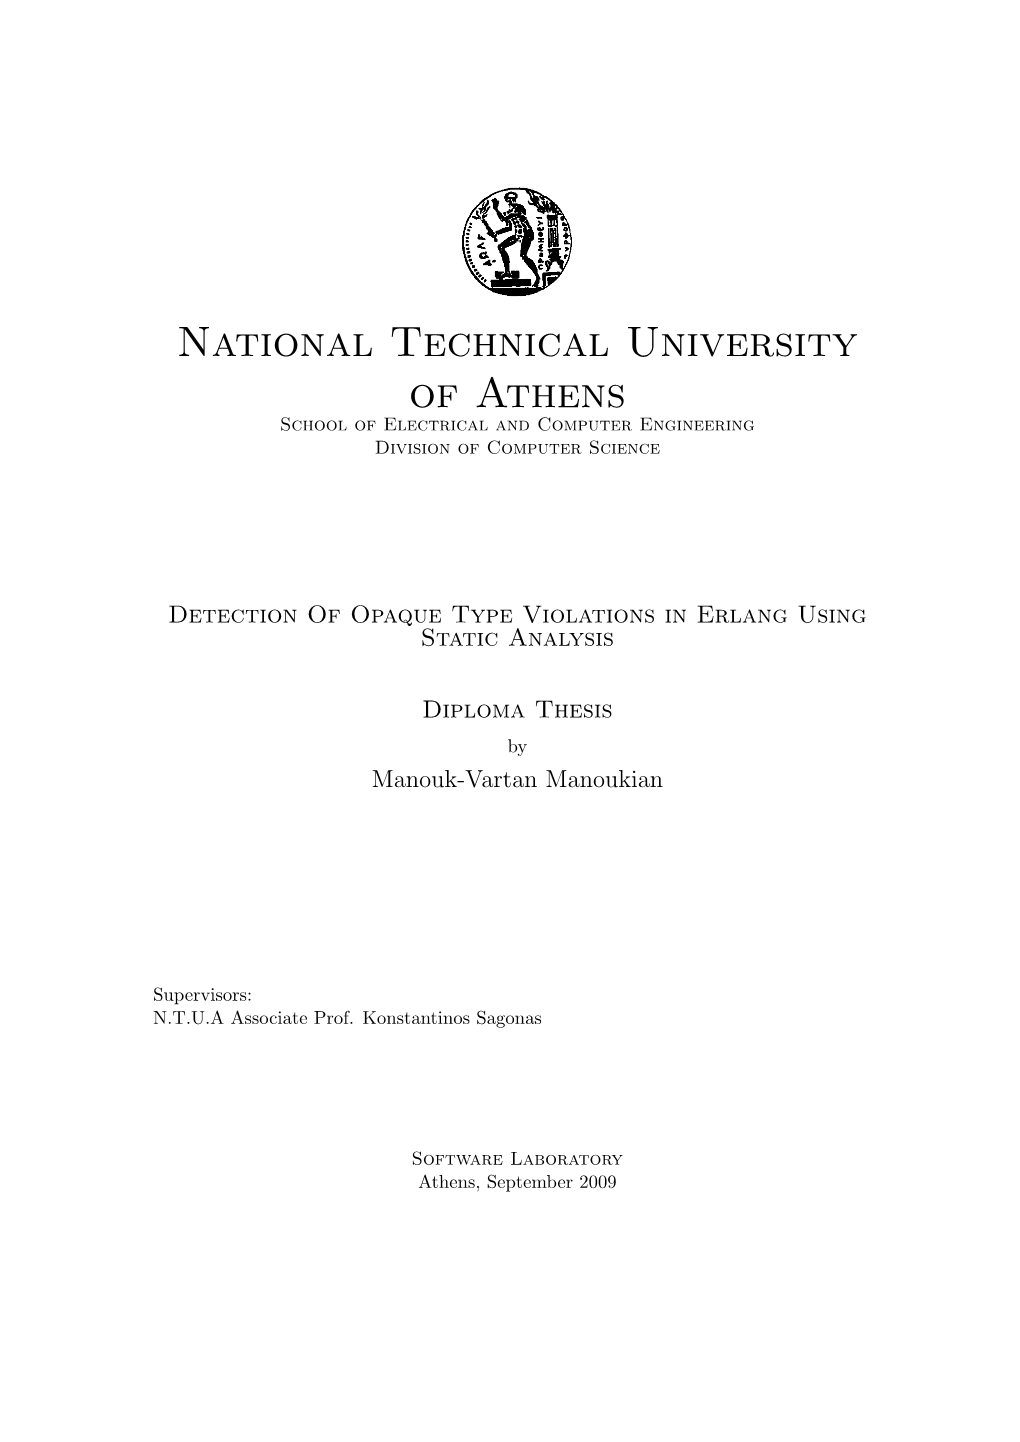 National Technical University of Athens School of Electrical and Computer Engineering Division of Computer Science